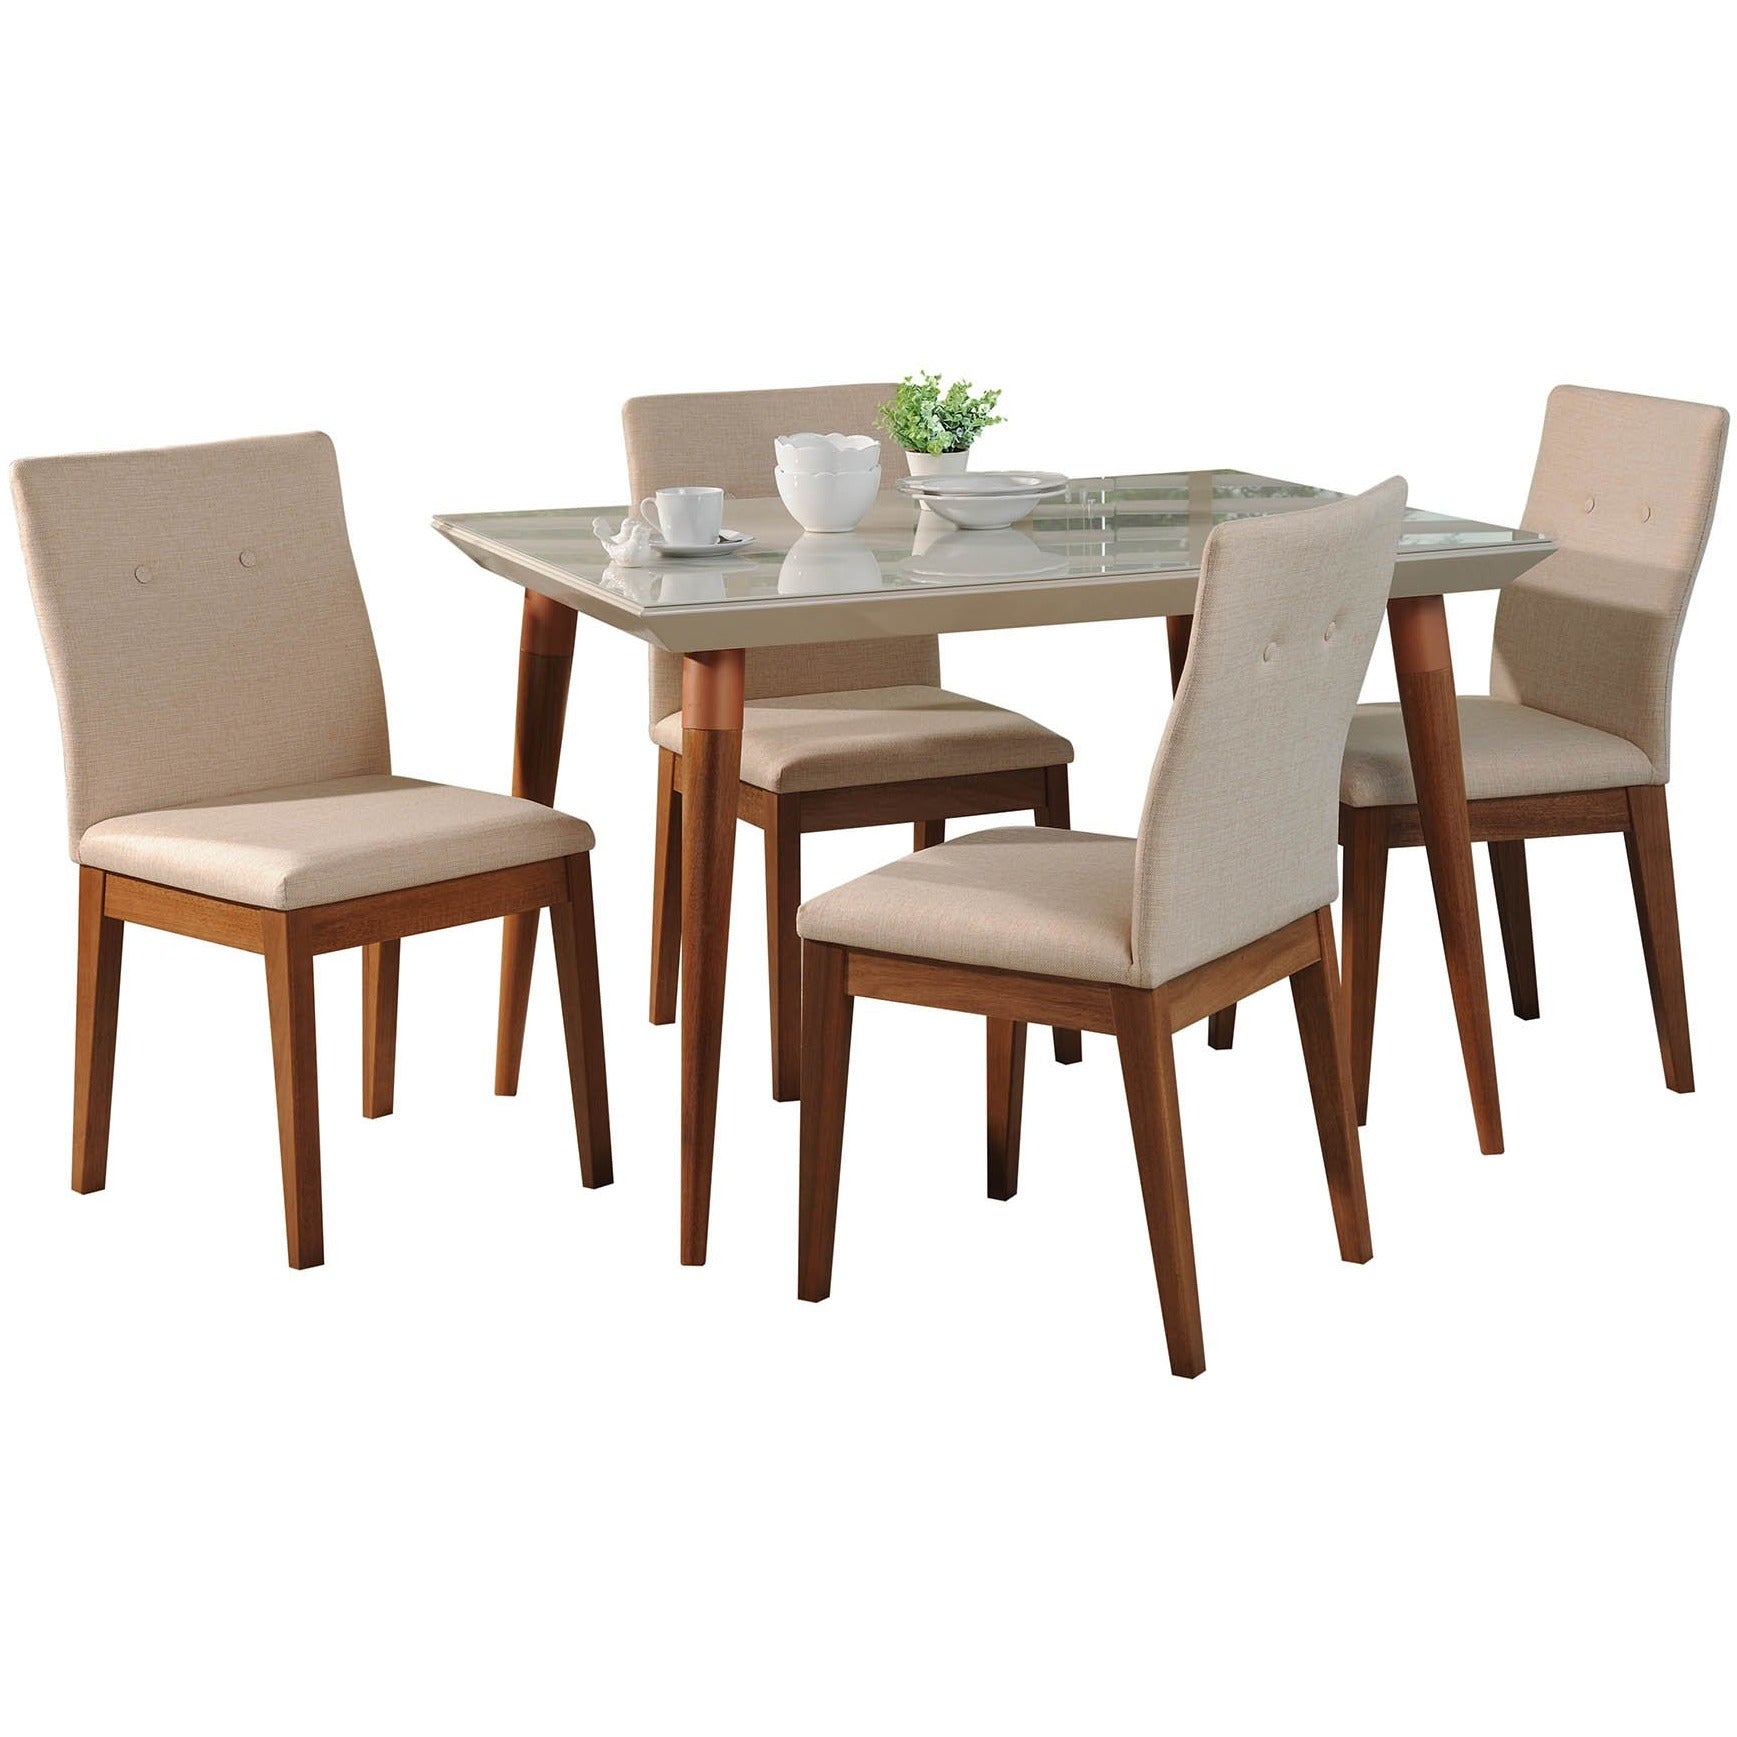 Manhattan Comfort 5-Piece Utopia 47.24" and Leroy Dining Set with 4 Dining Chairs in Off White and Dark Beige-Minimal & Modern